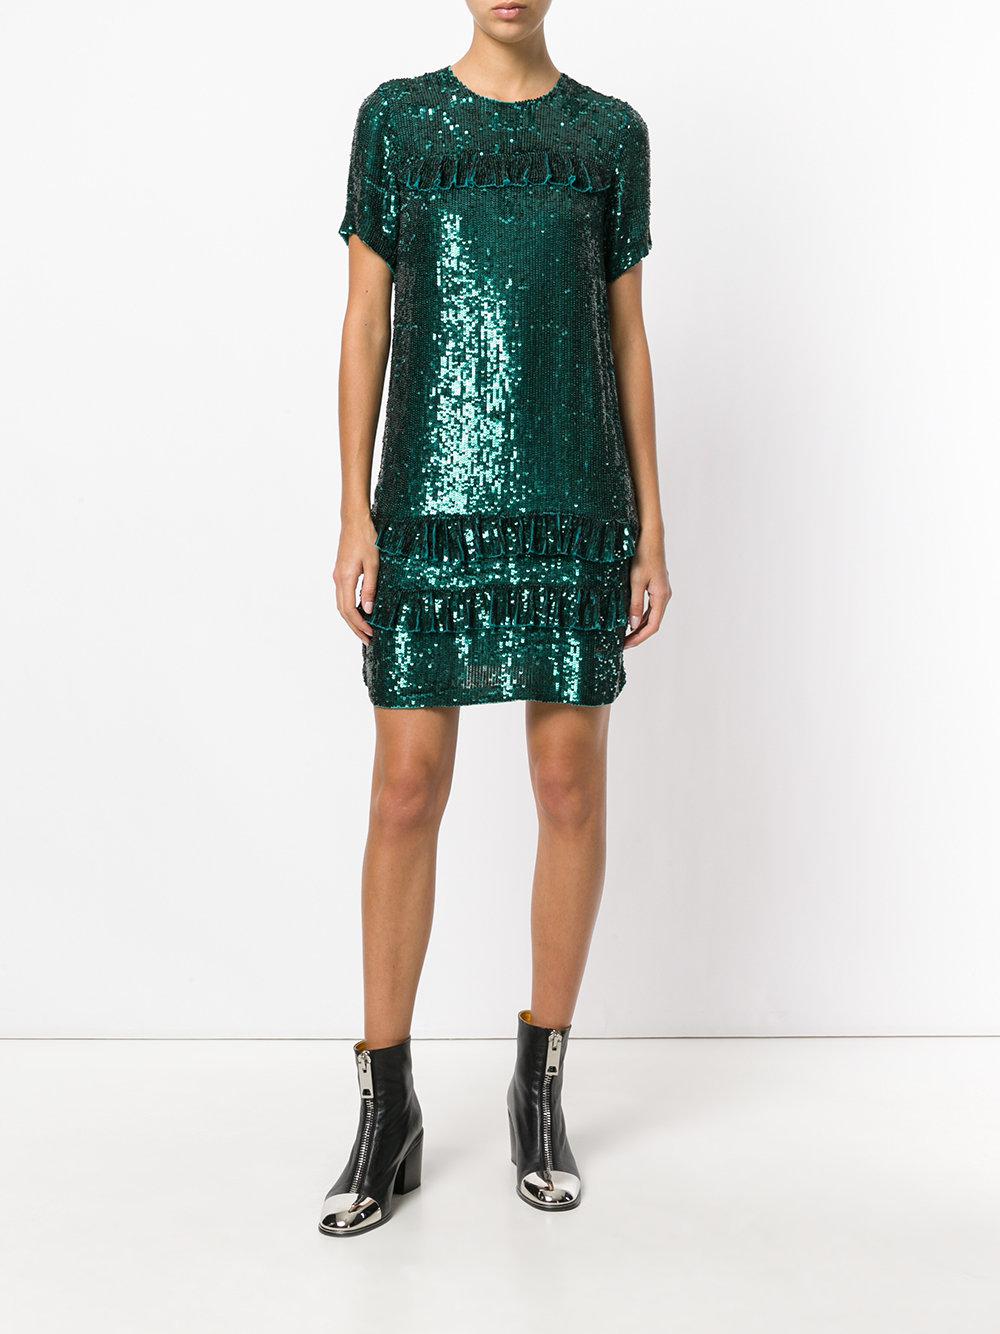 P.A.R.O.S.H. Synthetic Sequin Shift Dress in Green - Lyst